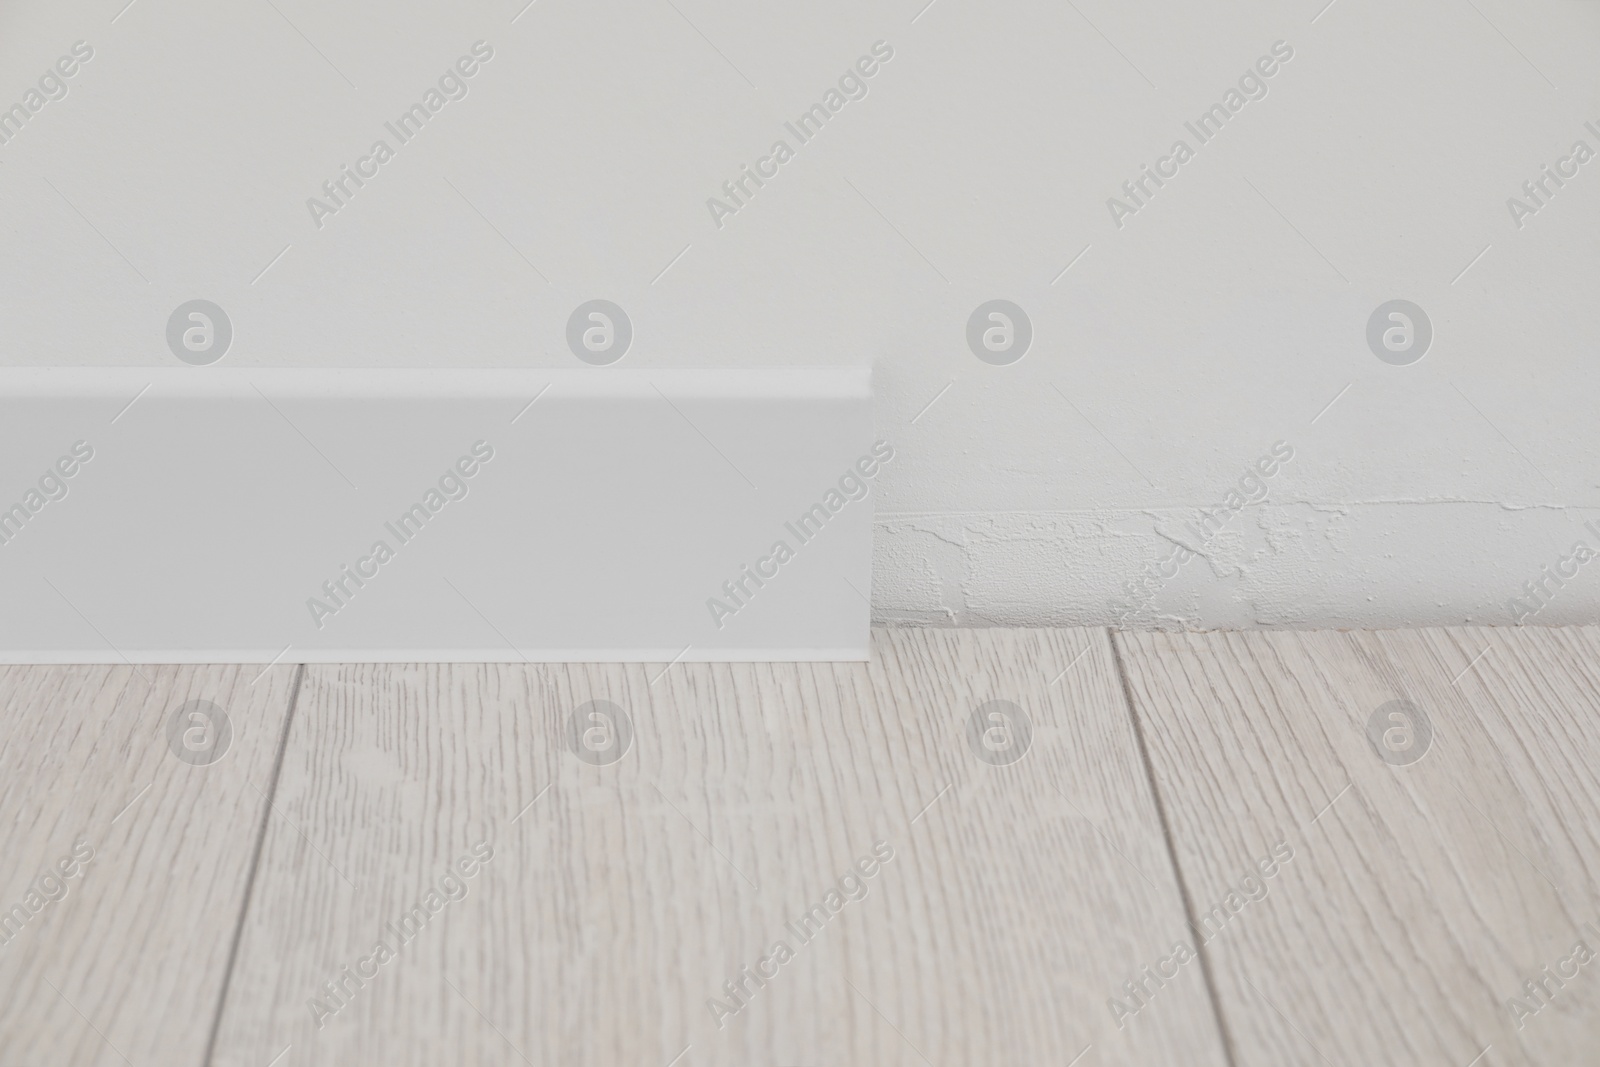 Photo of White plinth on laminated floor in room